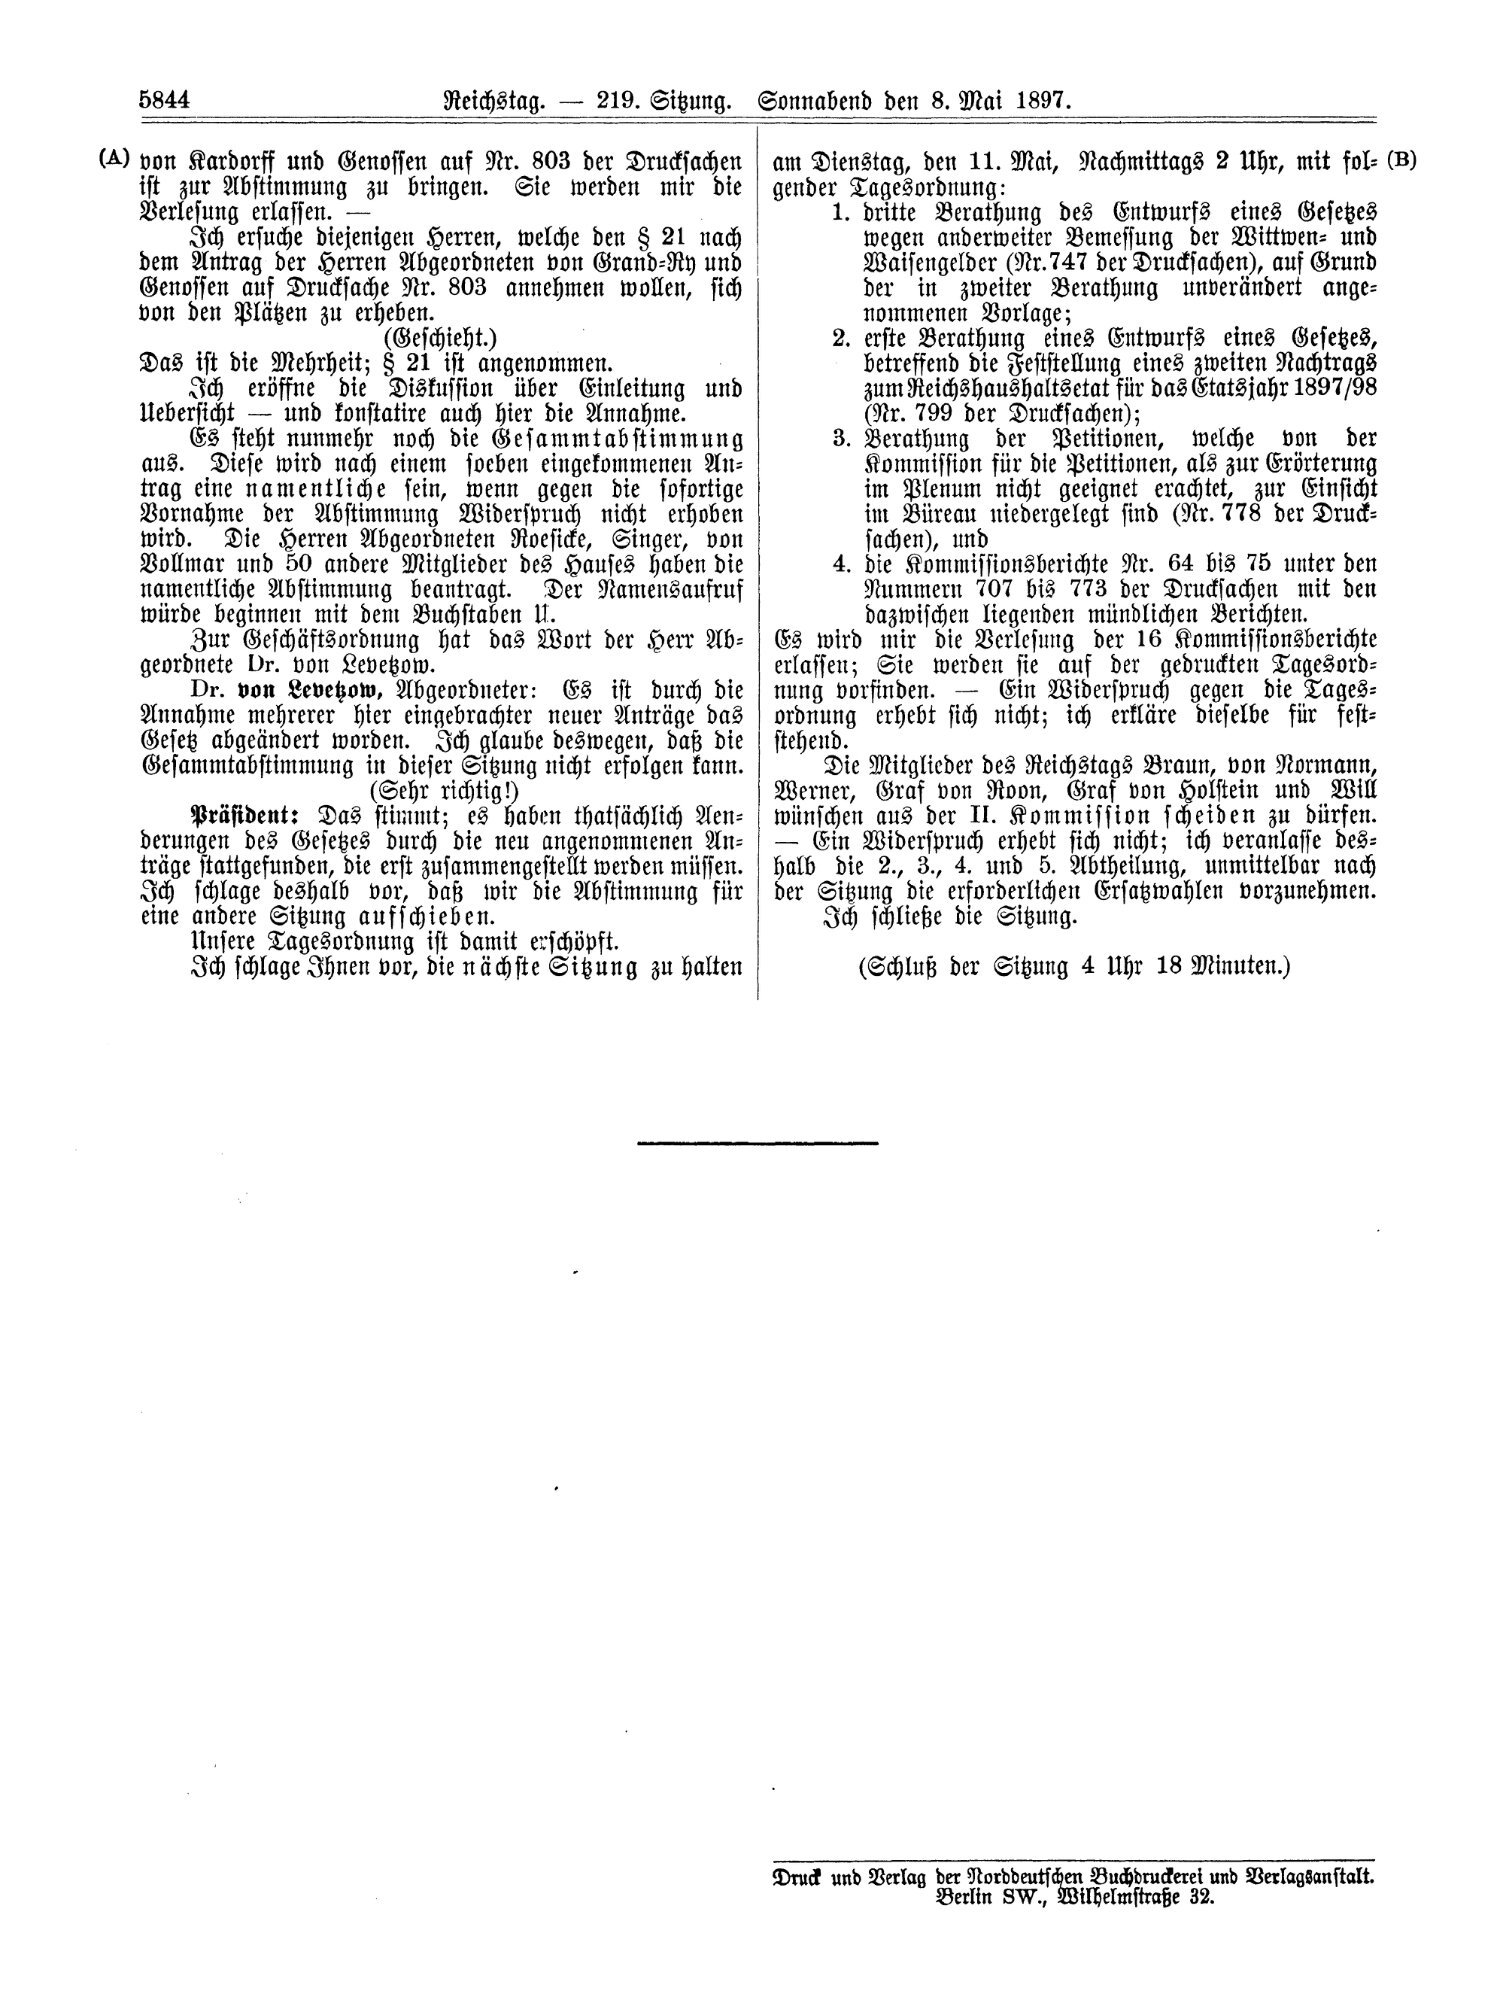 Scan of page 5844